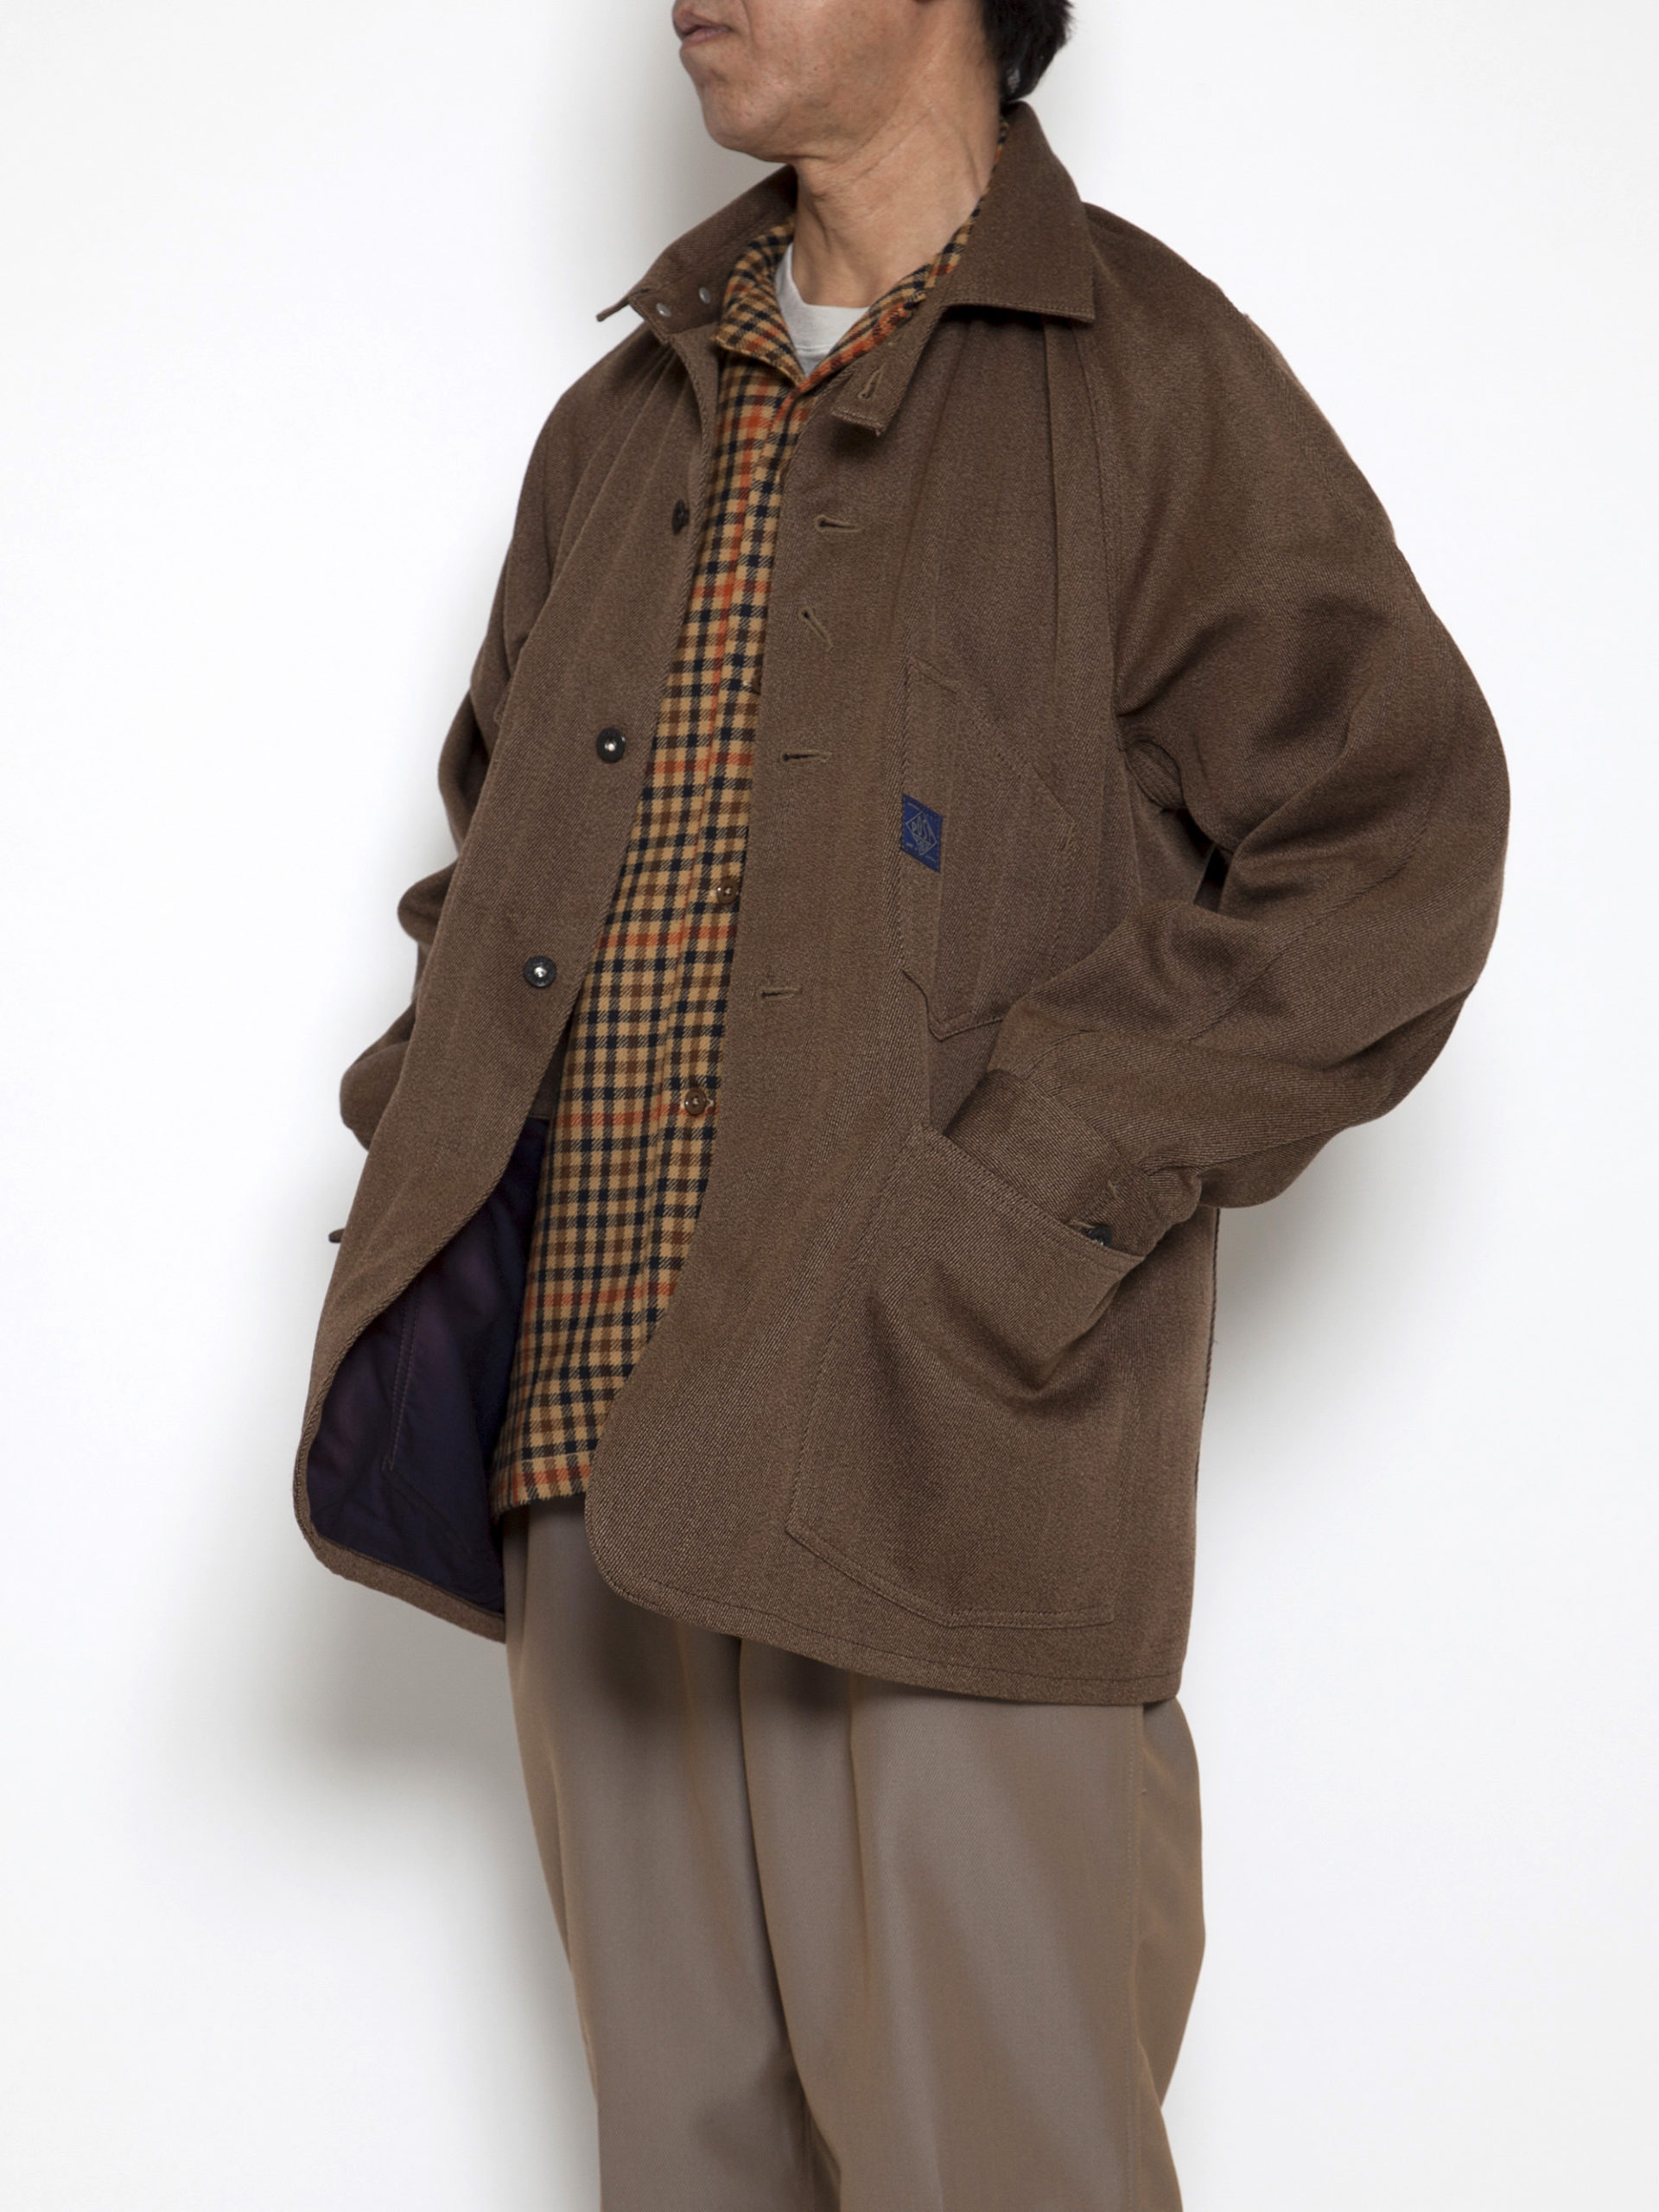 DELIVERY】PC1102 – POST O'ALLS #1102 “ENGINEER'S JACKET” | SPECIAL